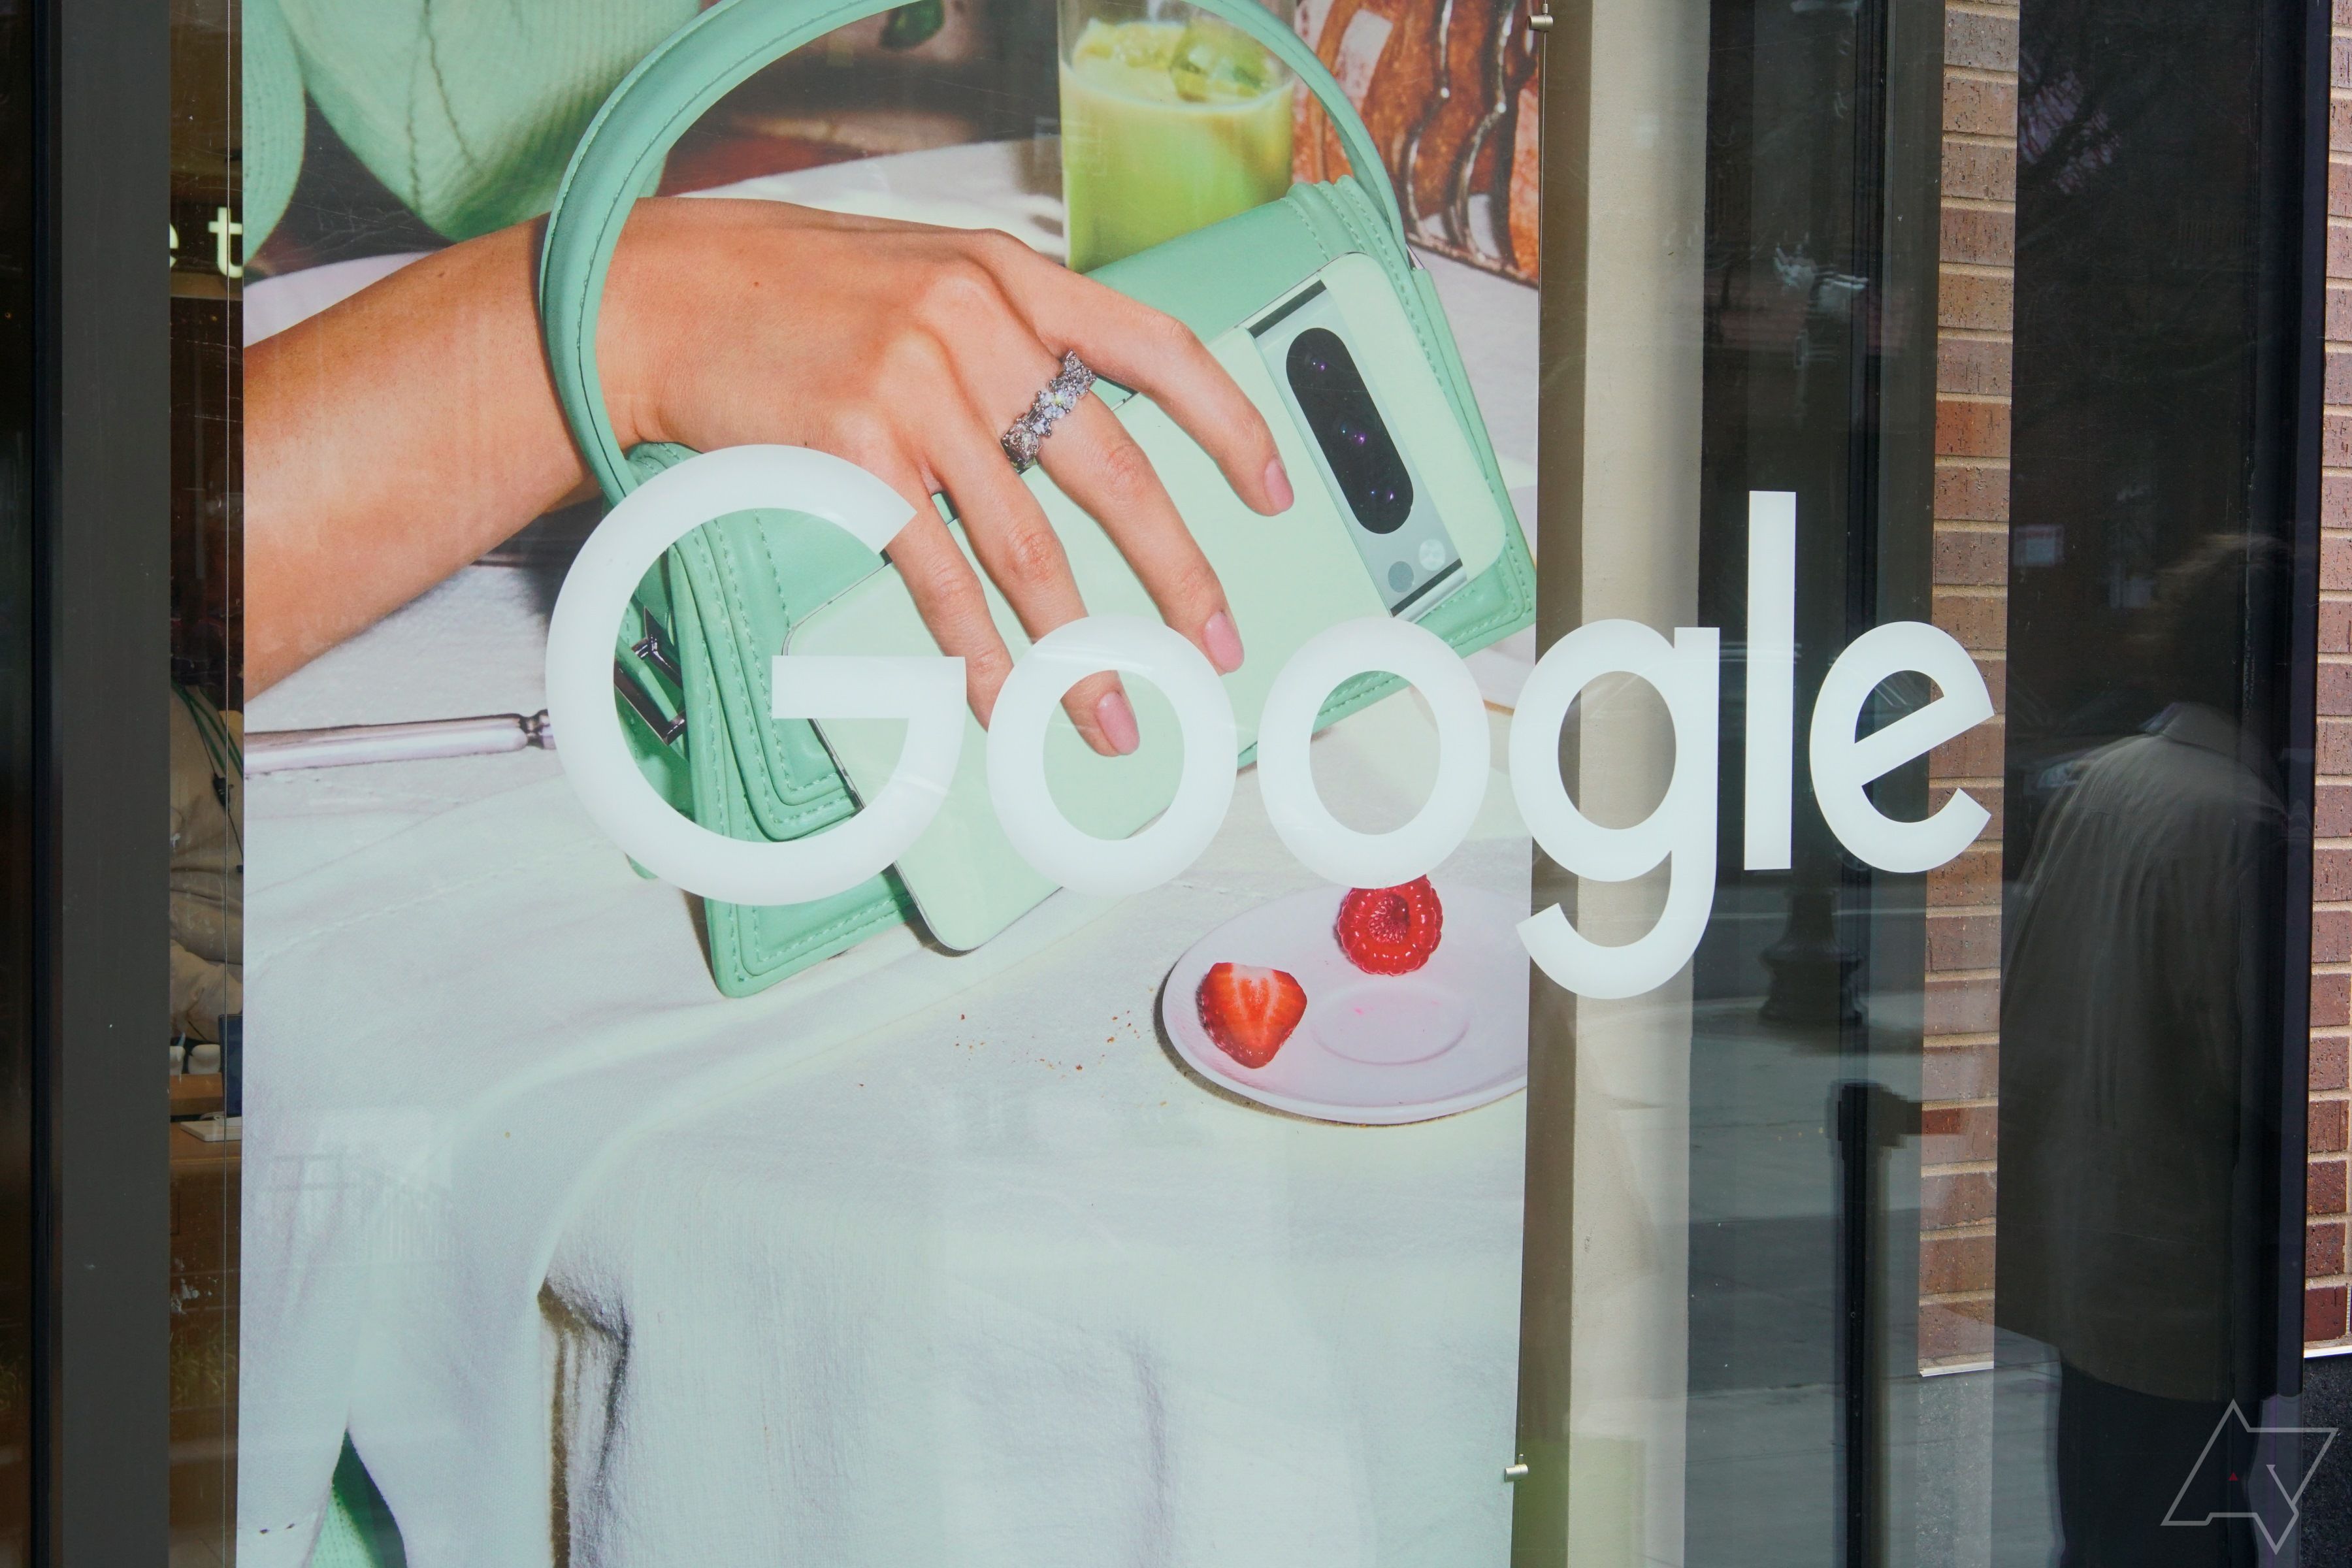 The Google wordmark printed on a window outside a retail location.